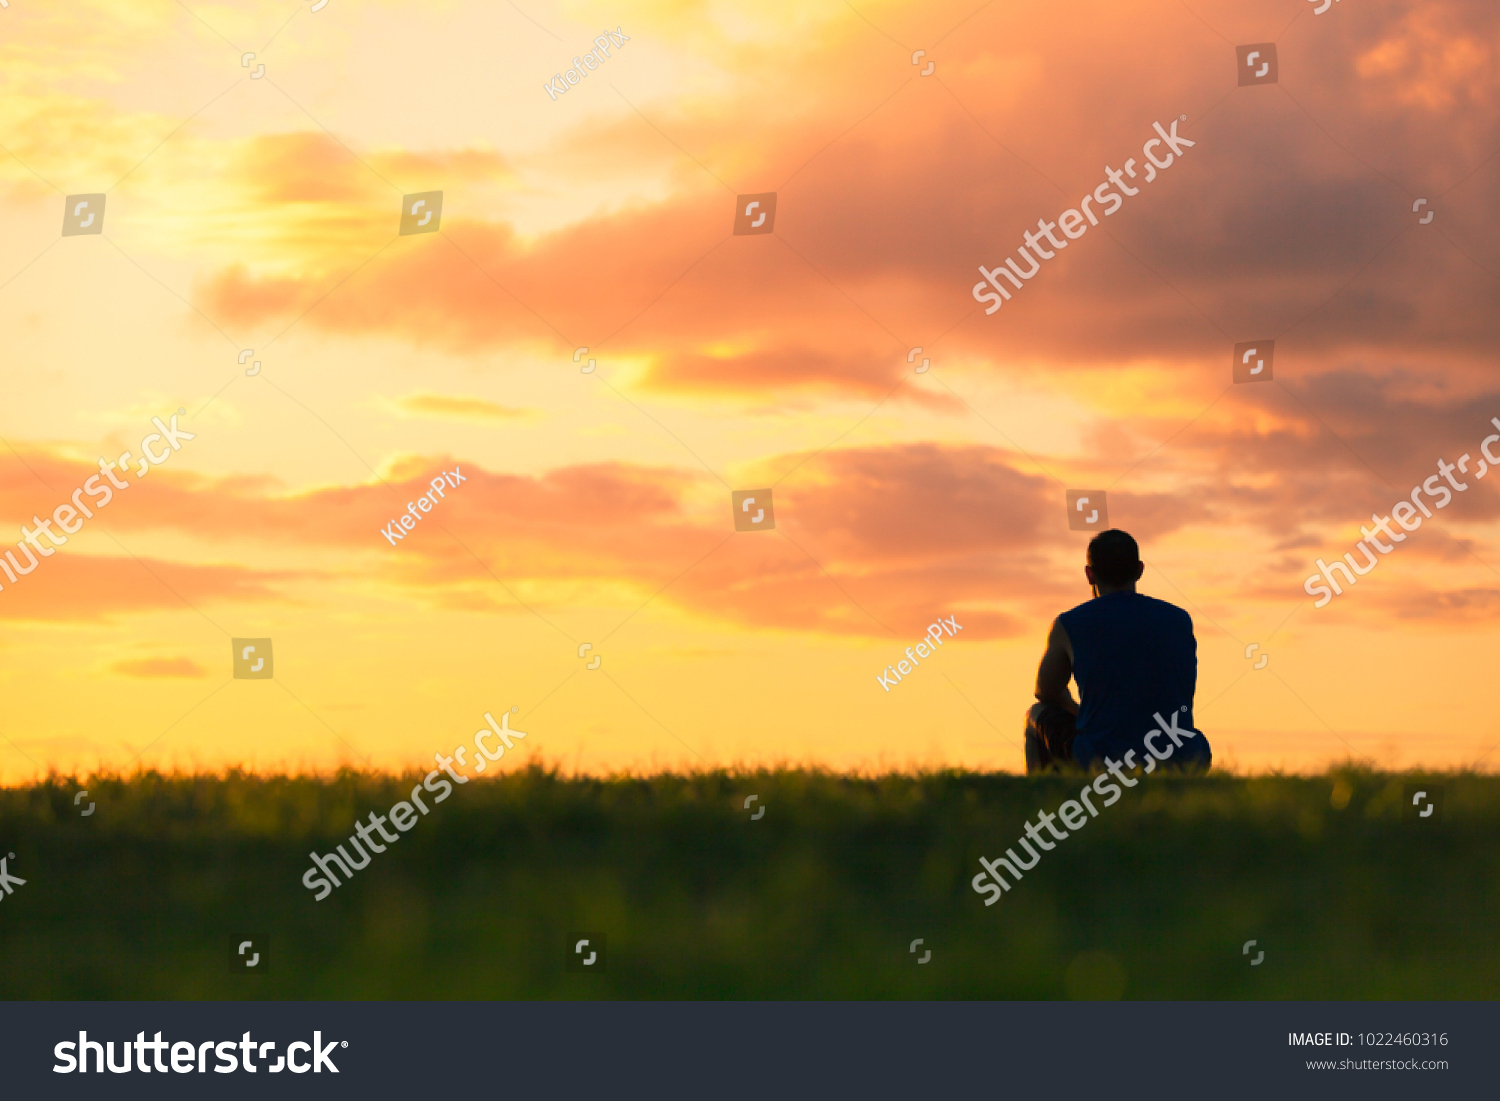 Man sitting watching sunset. Enjoying a peaceful moment, thinking, getting away from it all concept.  #1022460316